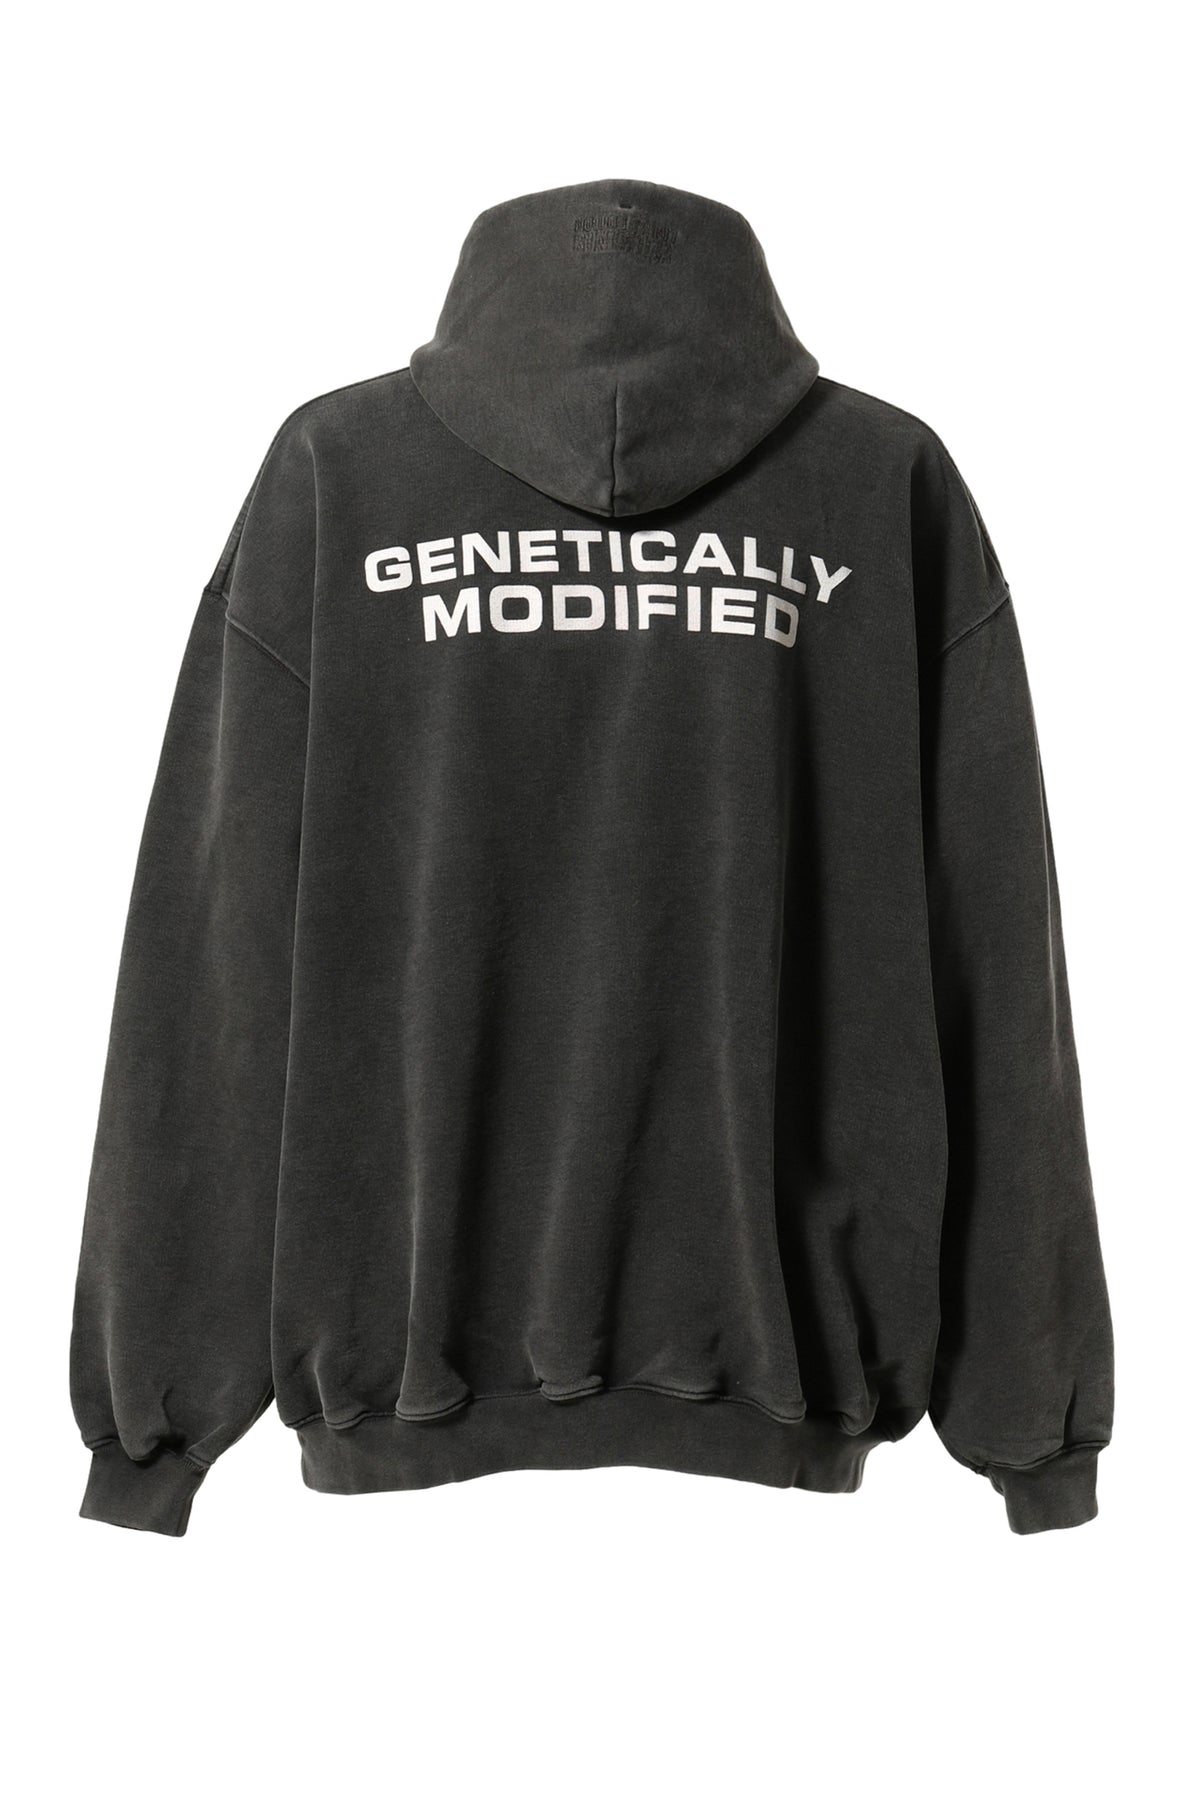 GENETICALLY MODIFIED HOODIE / WASHED BLK